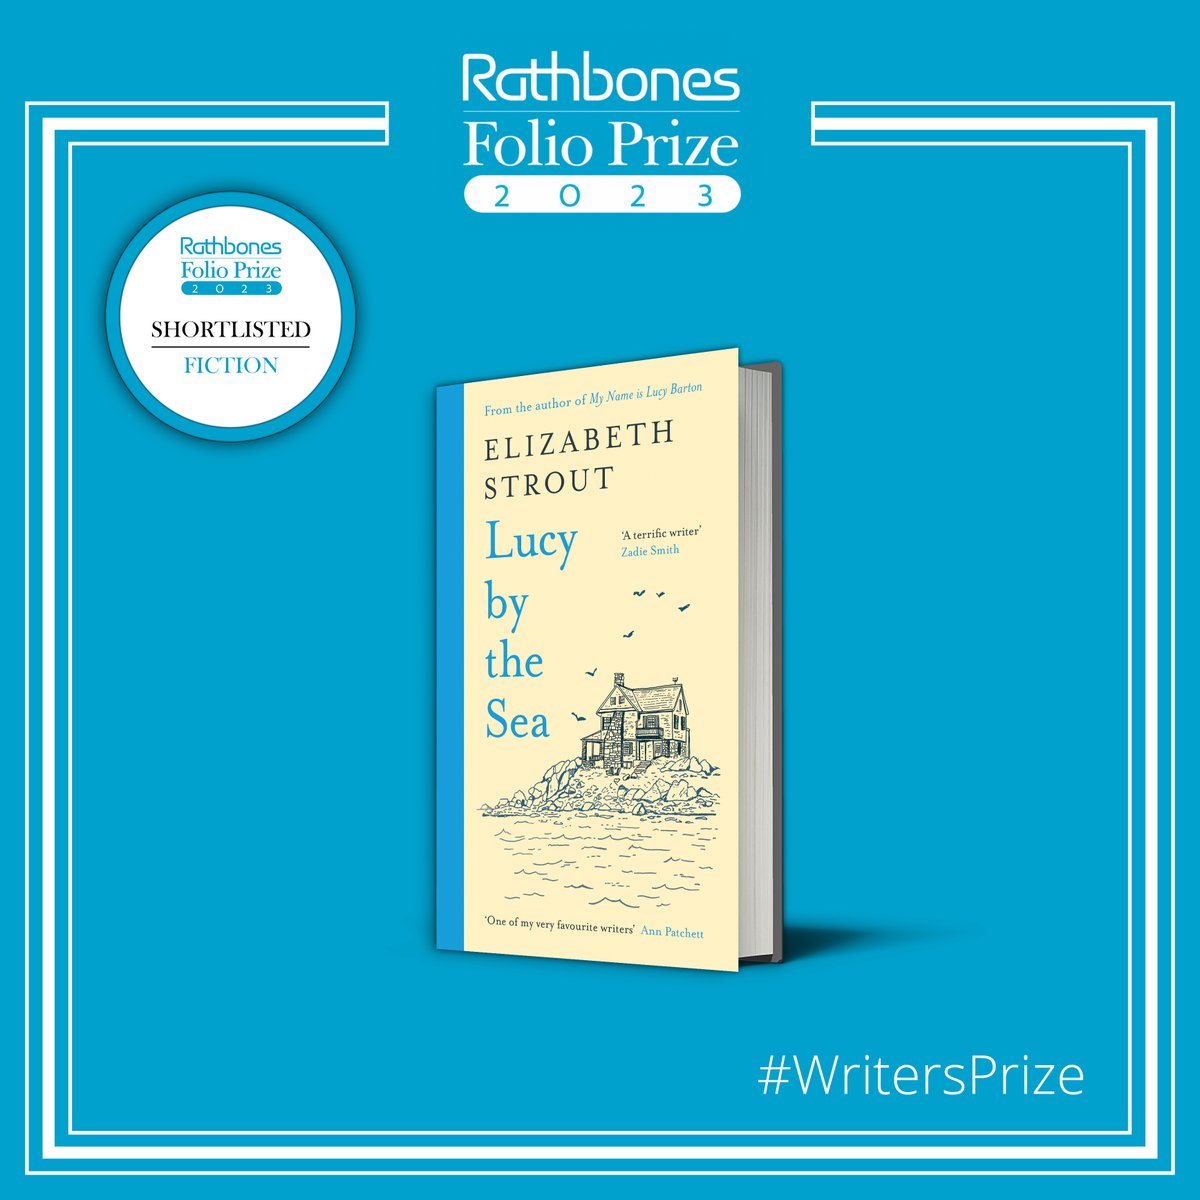 The final title in our #RathbonesFolioPrize Fiction shortlist is #LucyByTheSea by @LizStrout. Rich with empathy & a searing clarity, Lucy by the Sea evokes the fragility and uncertainty of the recent past, as well as the possibilities long, quiet days can inspire. @VikingBooksUK.